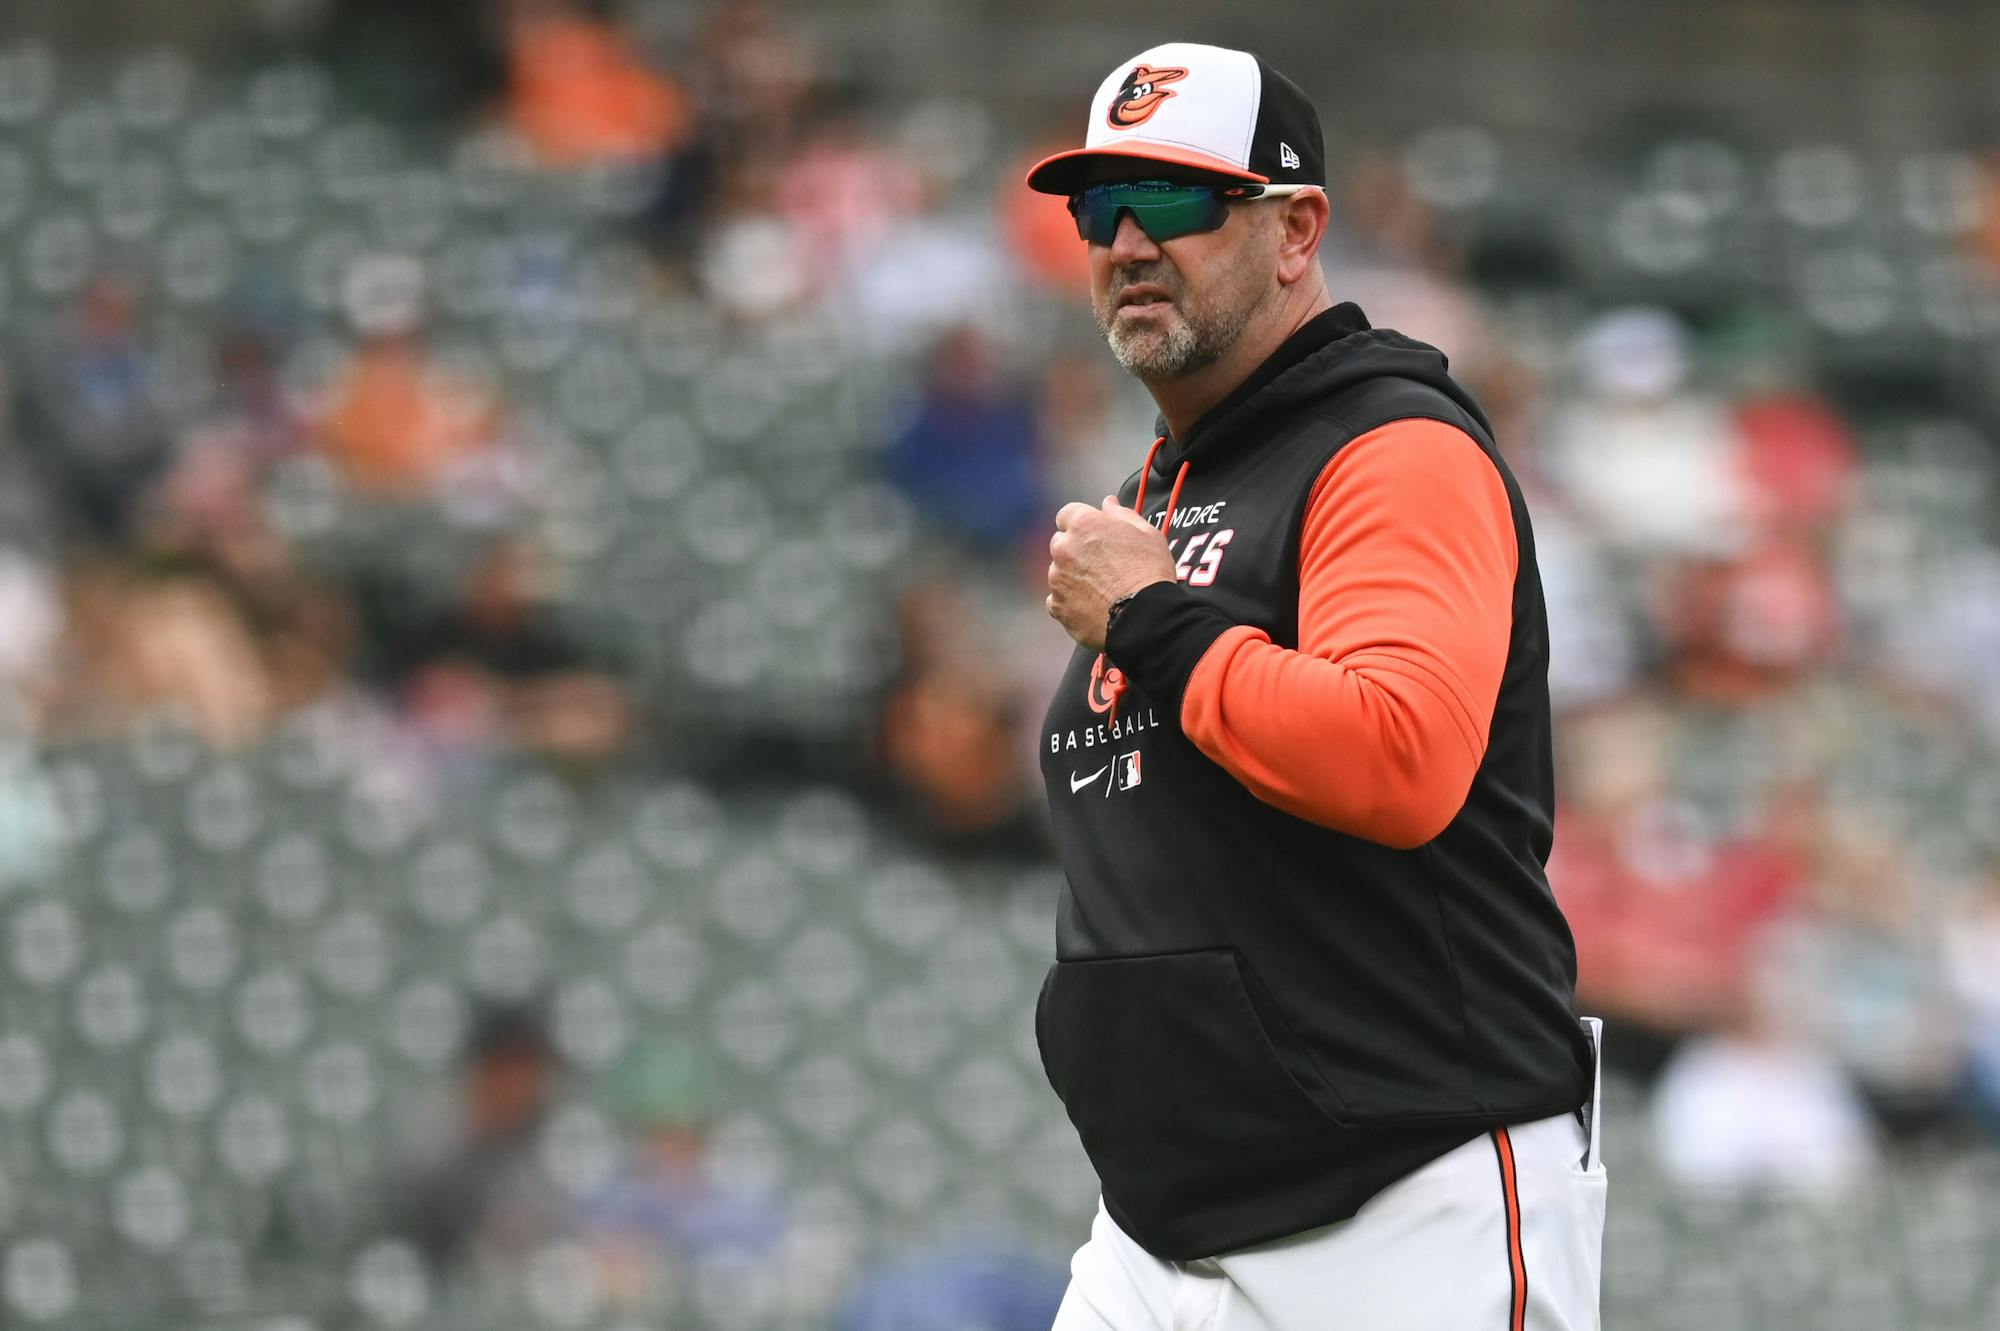 MLB Playoffs 2022 Odds: Will the Baltimore Orioles Make the